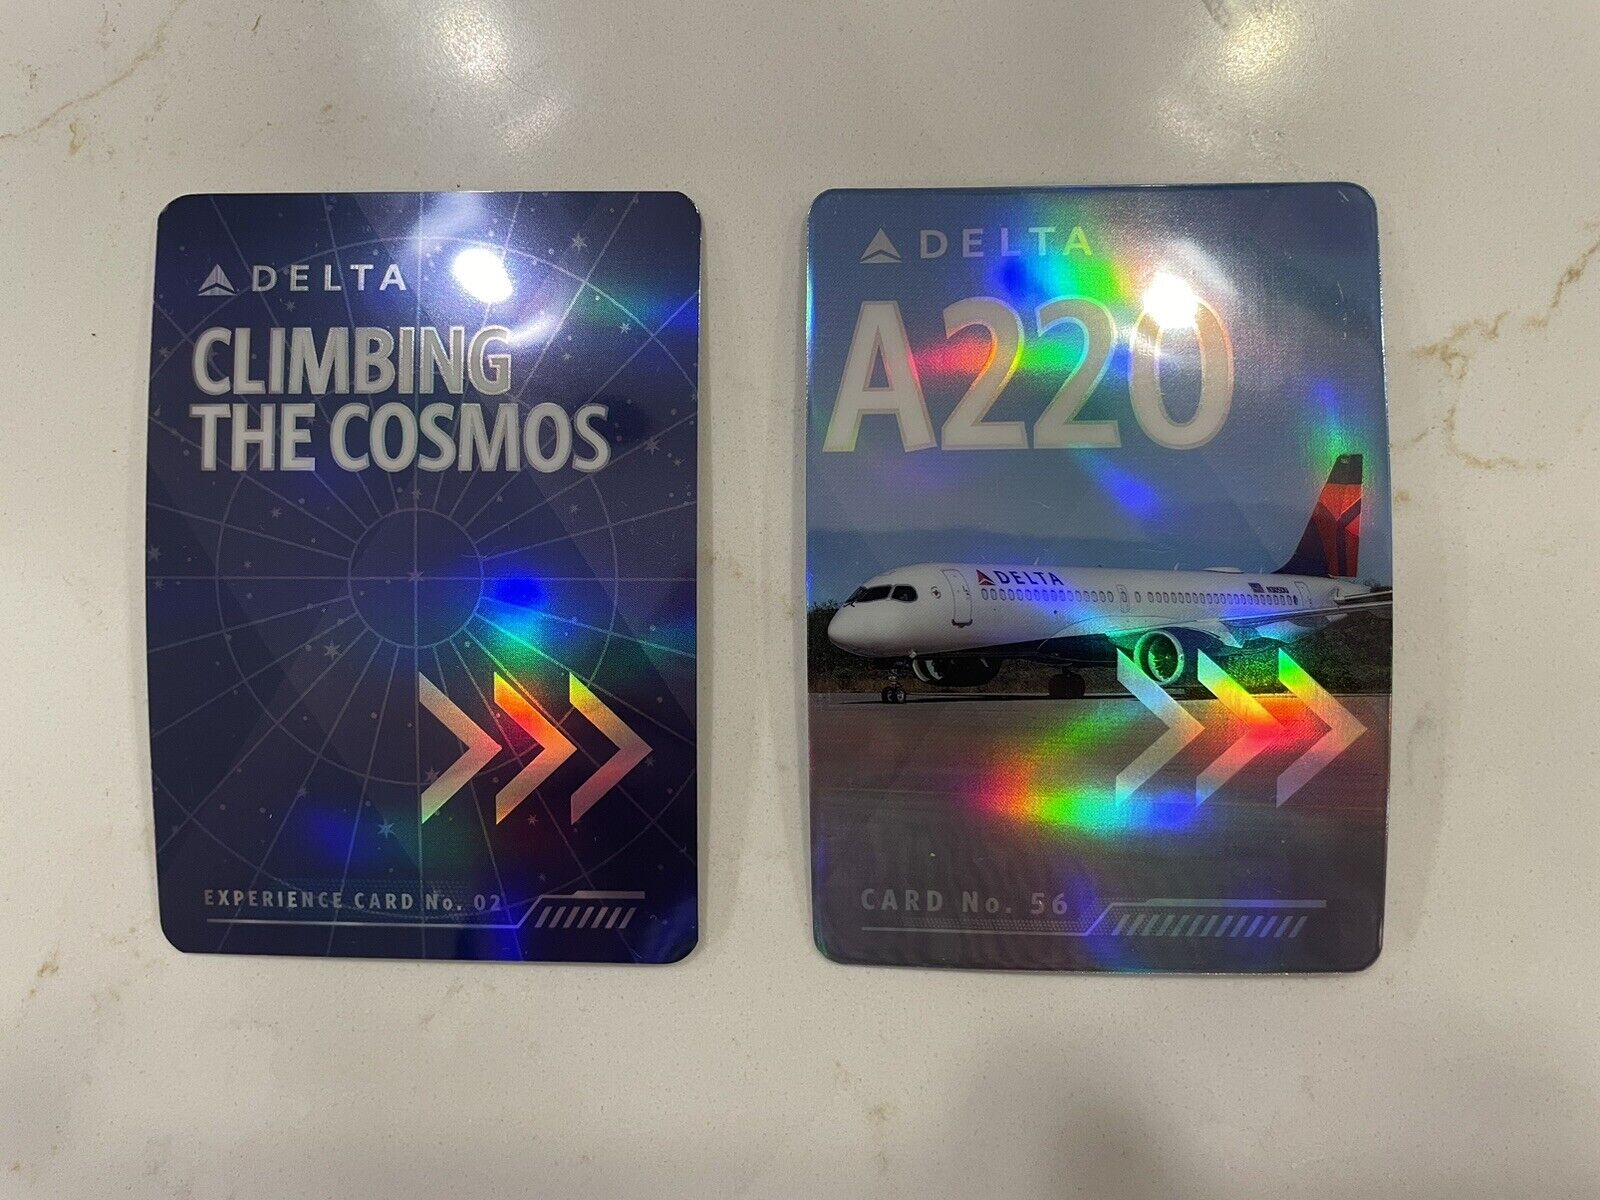 Delta Trading Cards Eclipse Climbing The Cosmos Experience No. 2 & Airbus A220